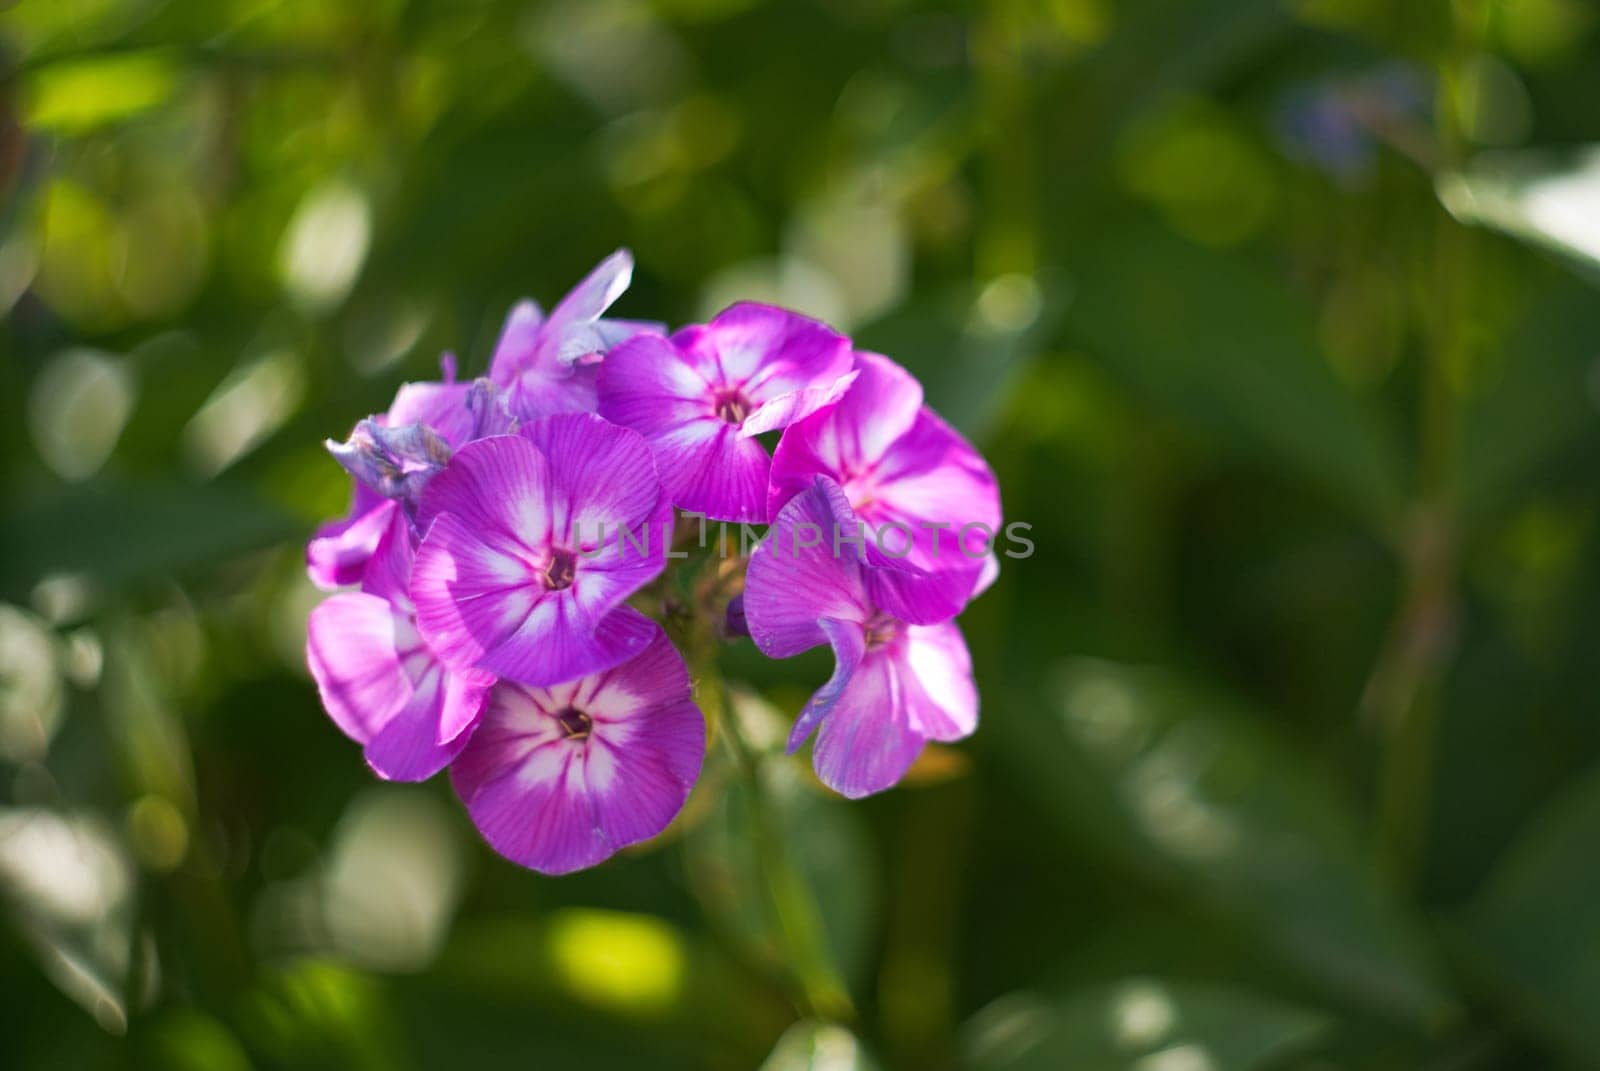 red lilac phlox on a blurred background with dew drops on the petals